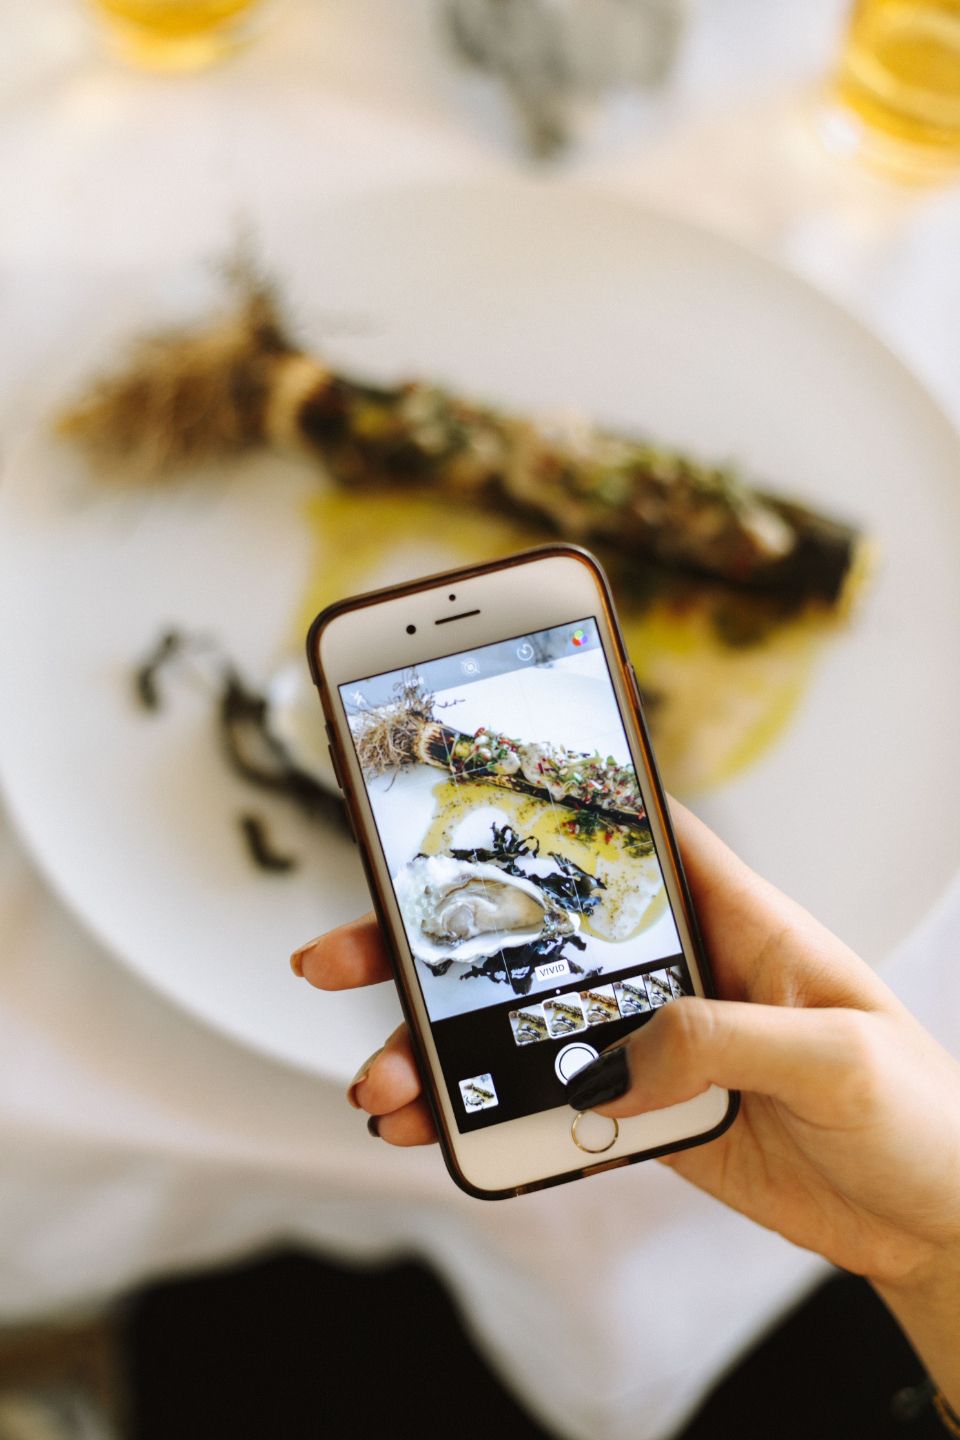 photograph of someone taking a mobile phone image of a plate of seafood